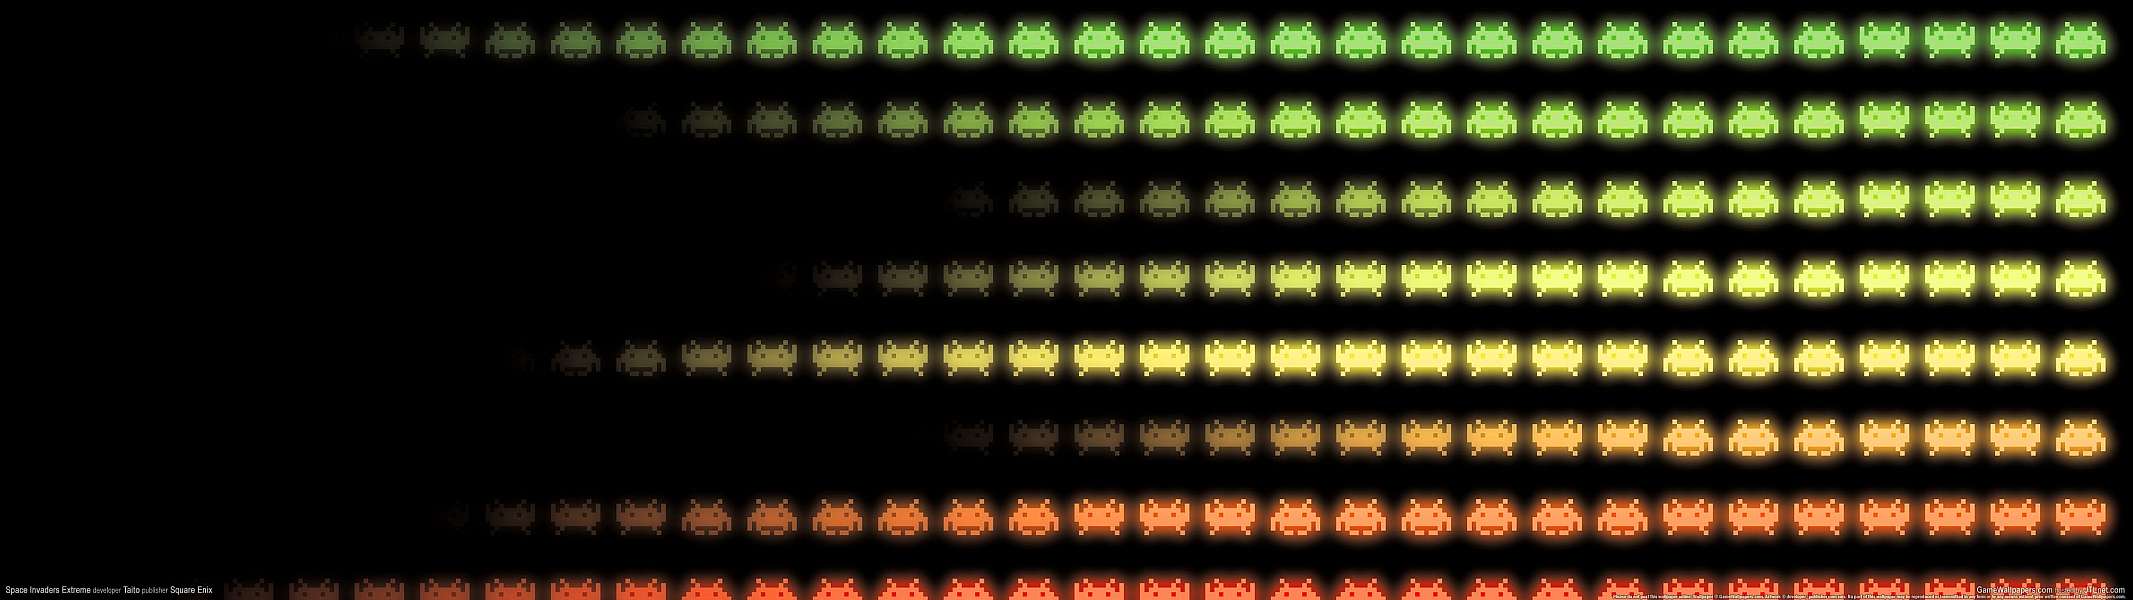 Space Invaders Extreme dual screen achtergrond